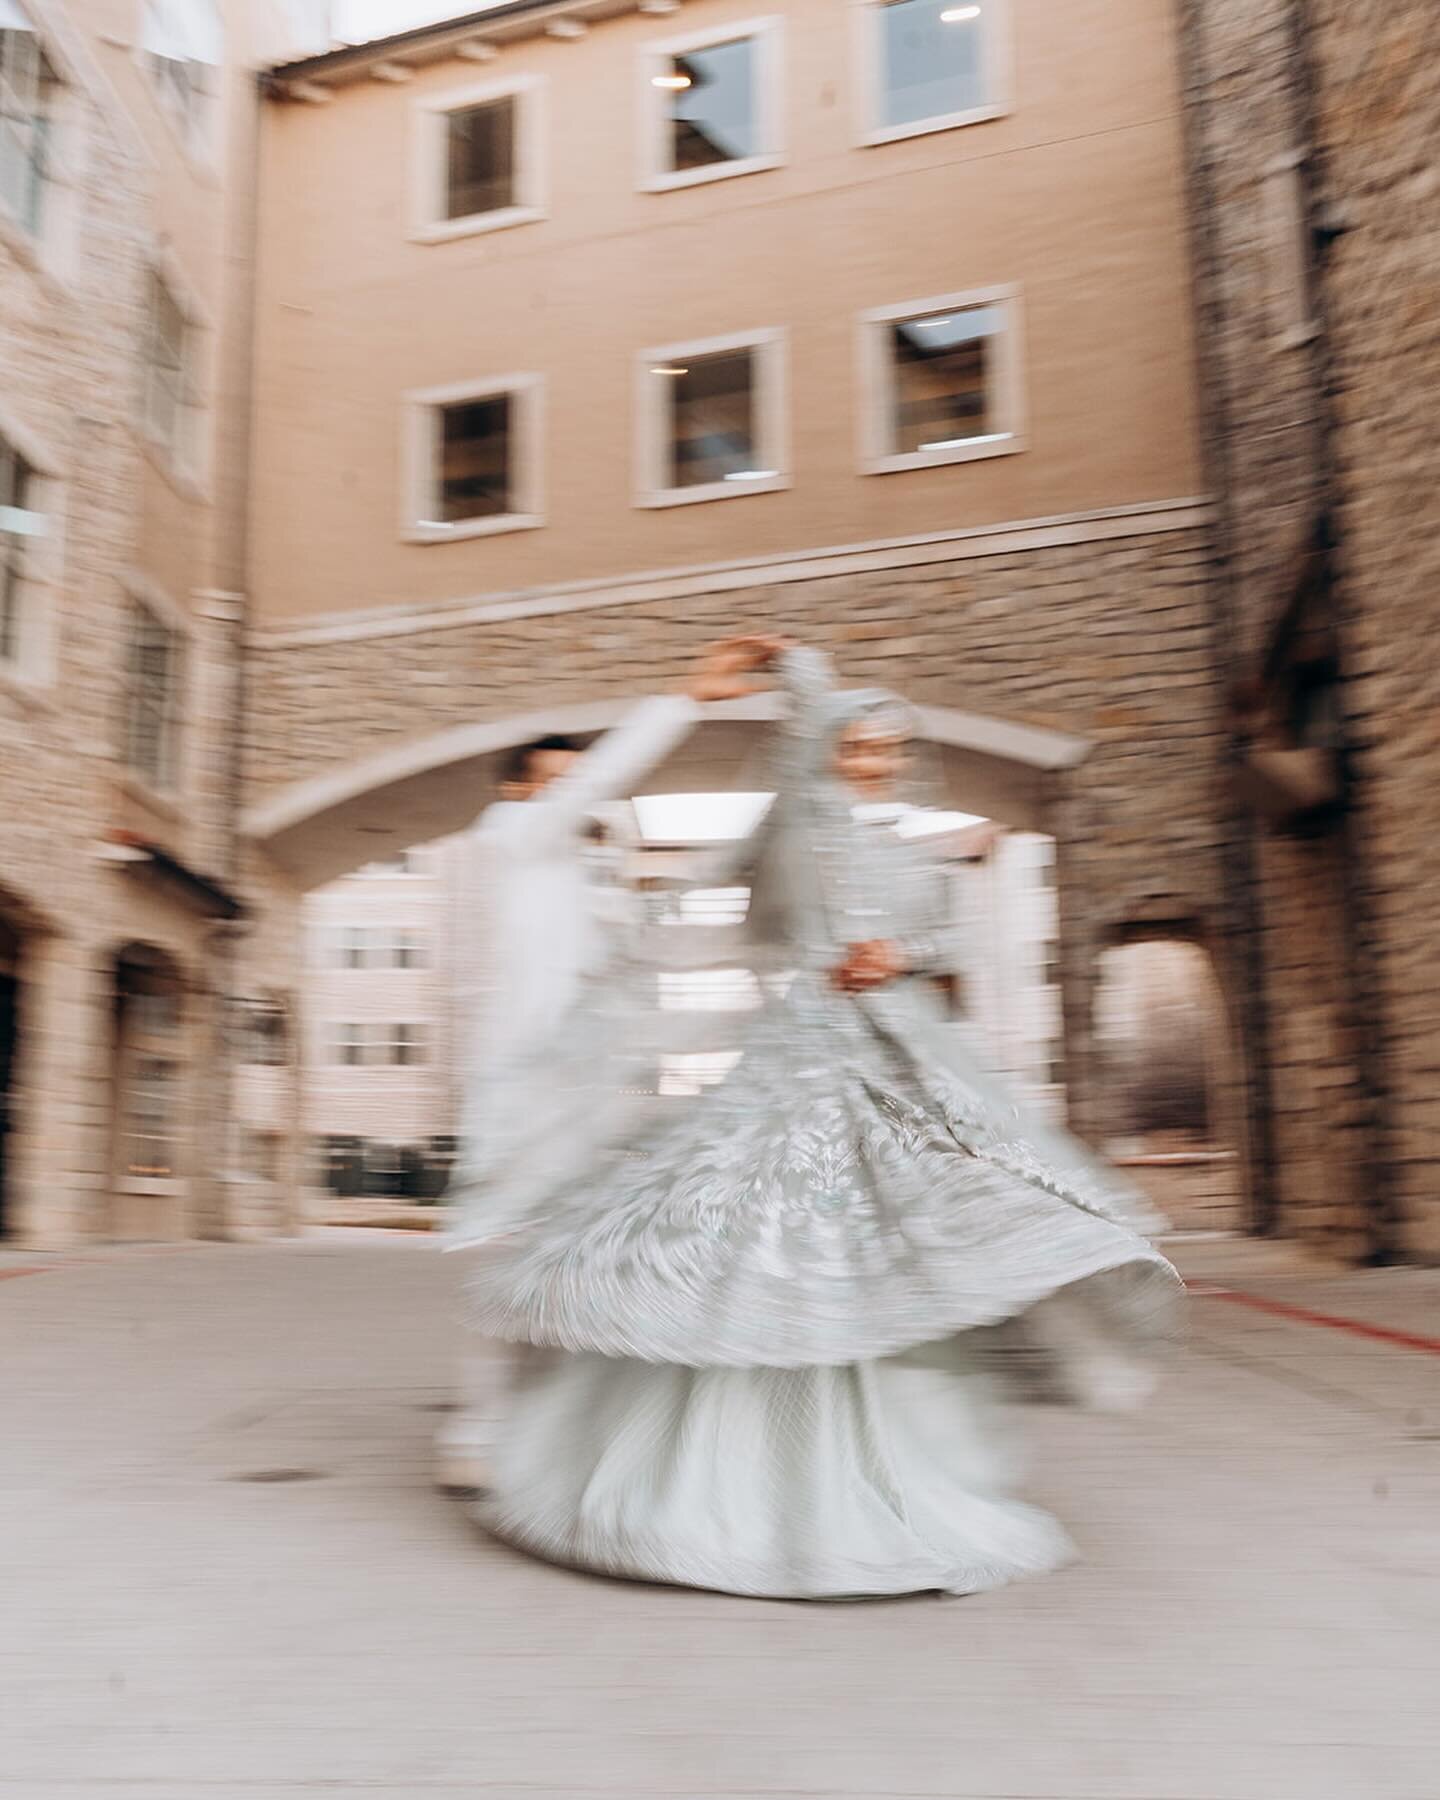 In a single spin, the world fades away, leaving only the whirlwind of joy between two souls 🌪️💕

#weddingphotographer #destinationweddingphotographer #engagementphotographer #dallastexas #southasianphotographer #southasianvideographer #dallasphotog